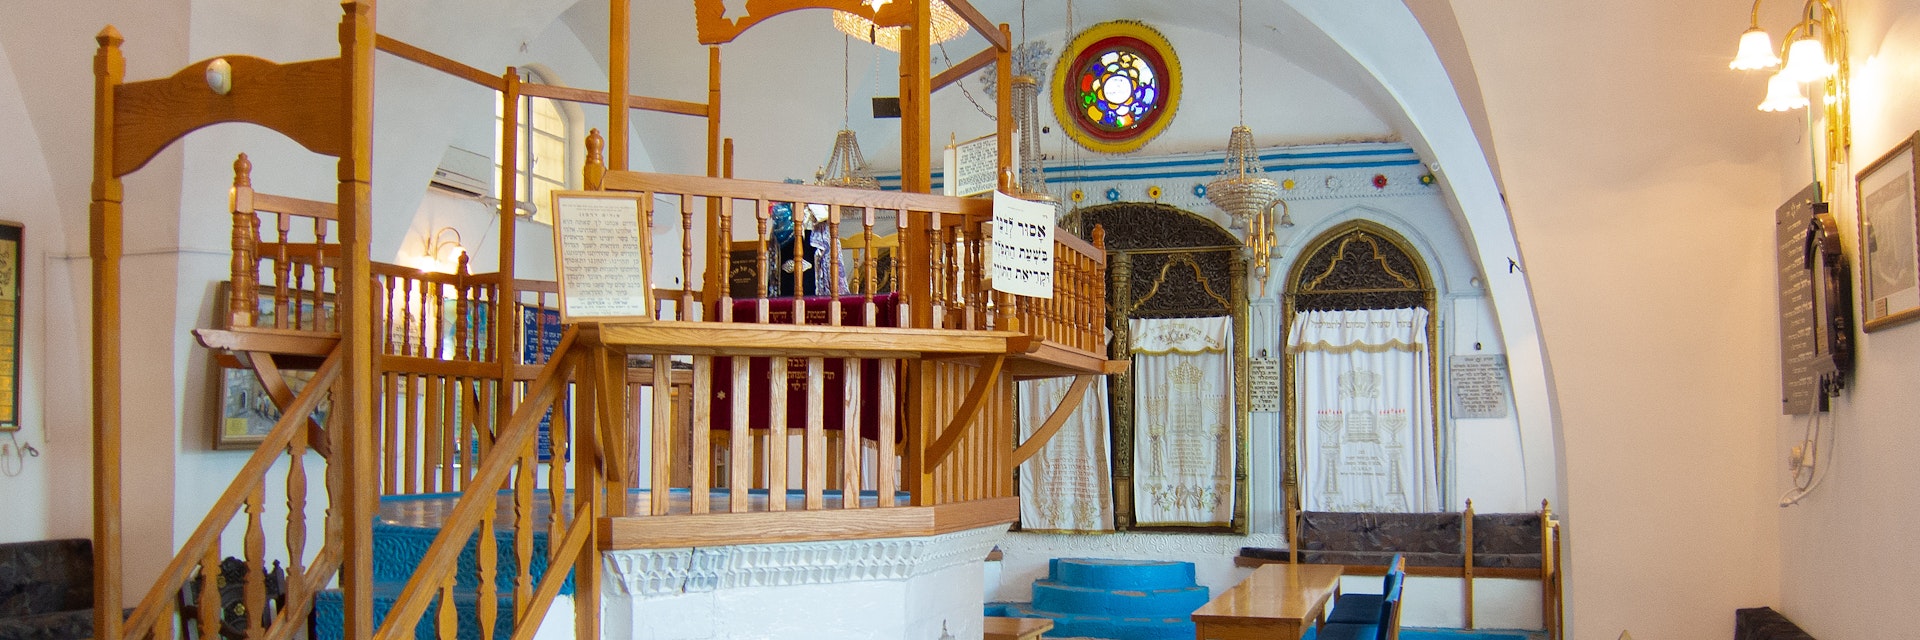 Interior of the historic Sephardic Ary synagogue in Tsfat, Israel.